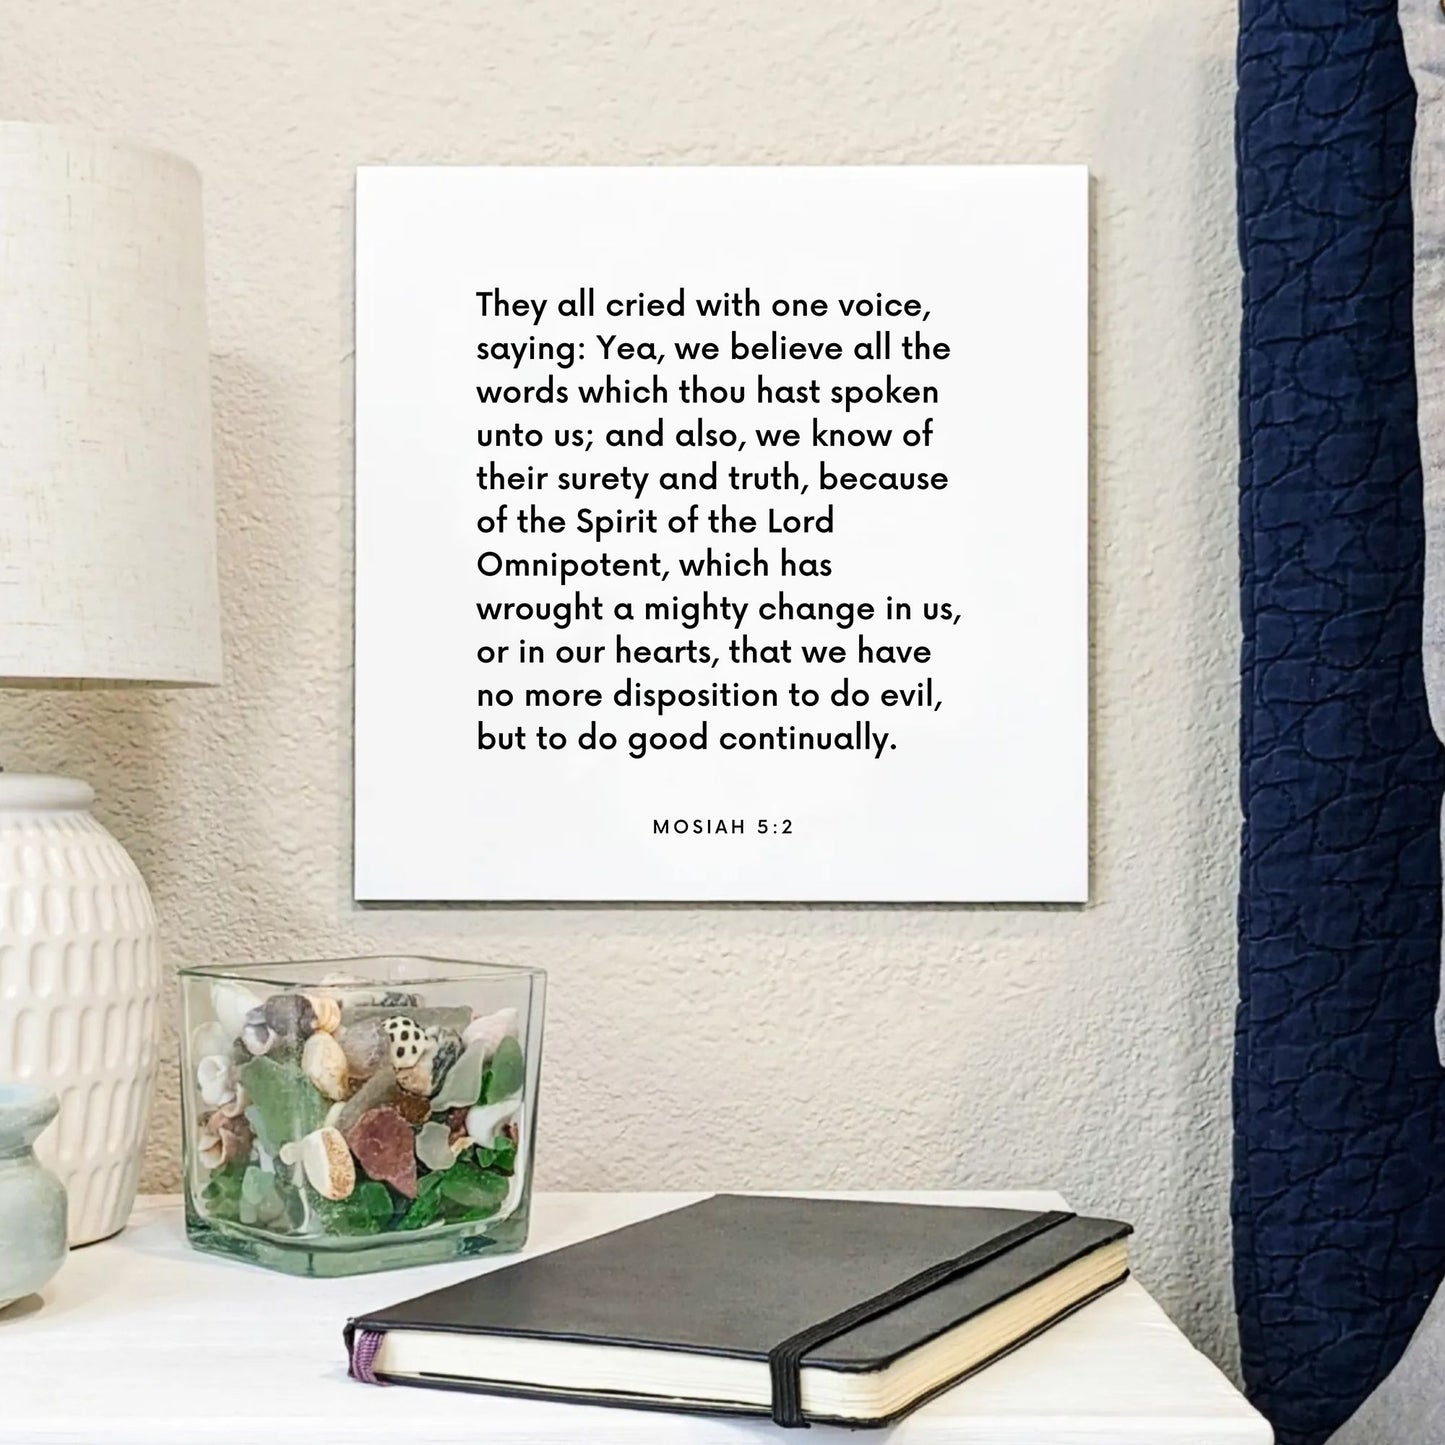 Bedside mouting of the scripture tile for Mosiah 5:2 - "We have no more disposition to do evil"